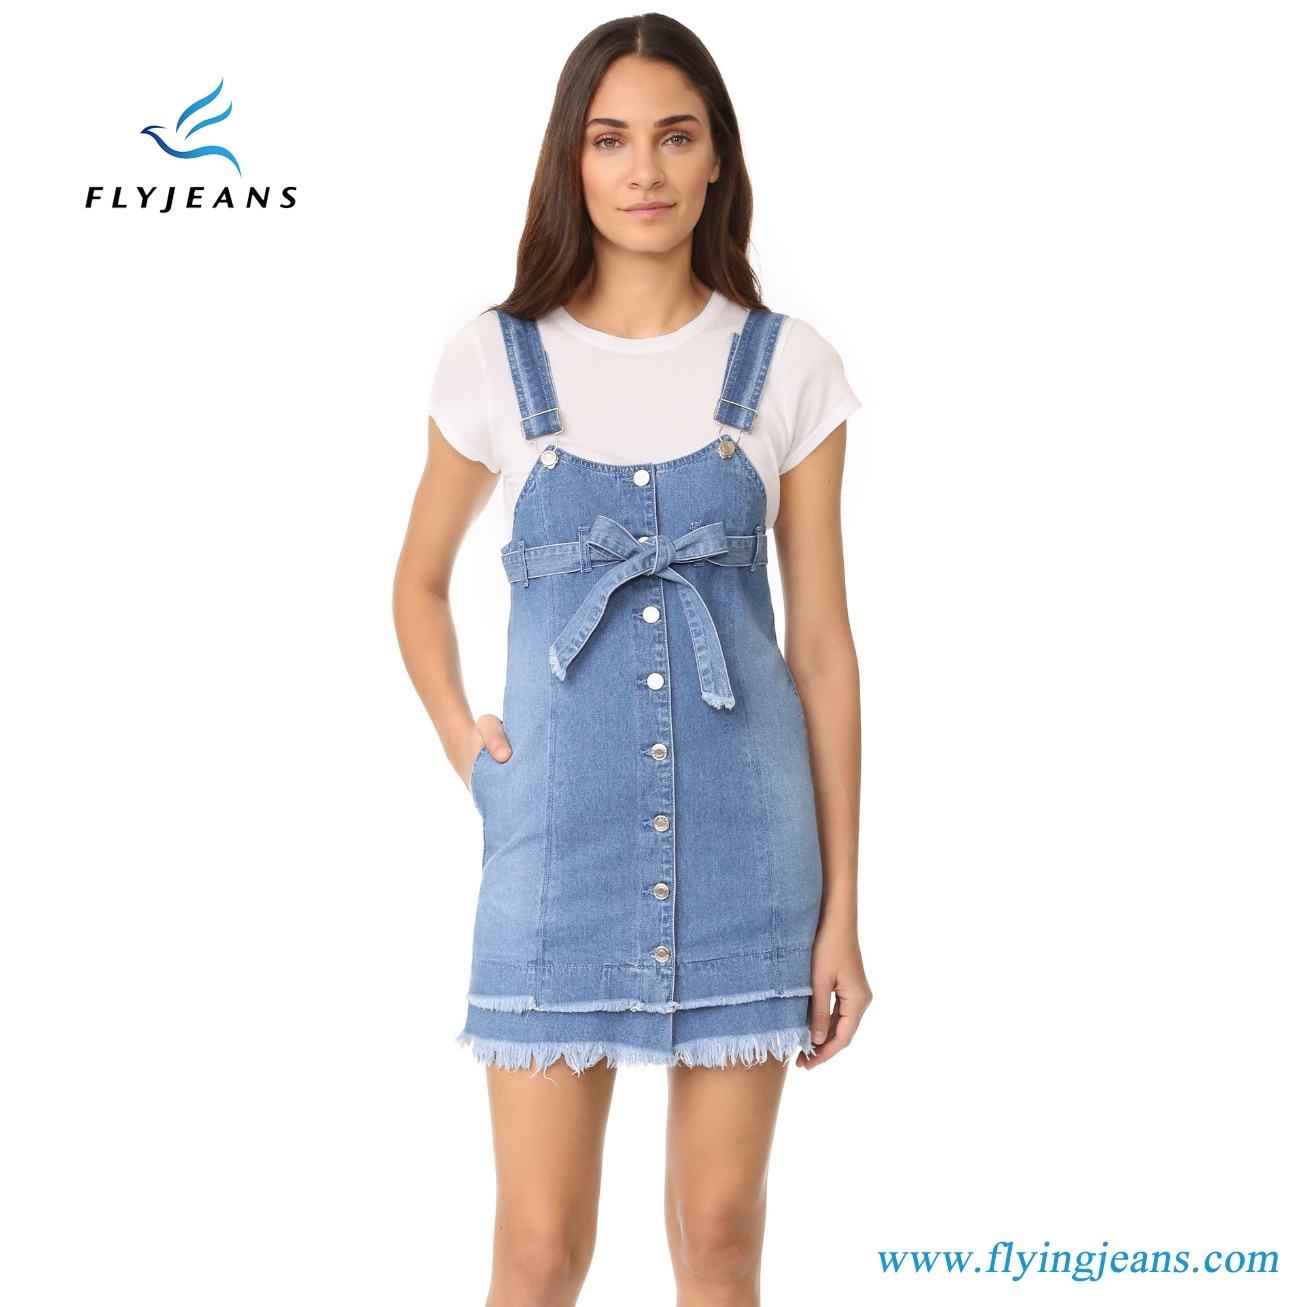 Fashionable Women 100% Cotton Denim Dress with  Adjustable Overall-Style Straps